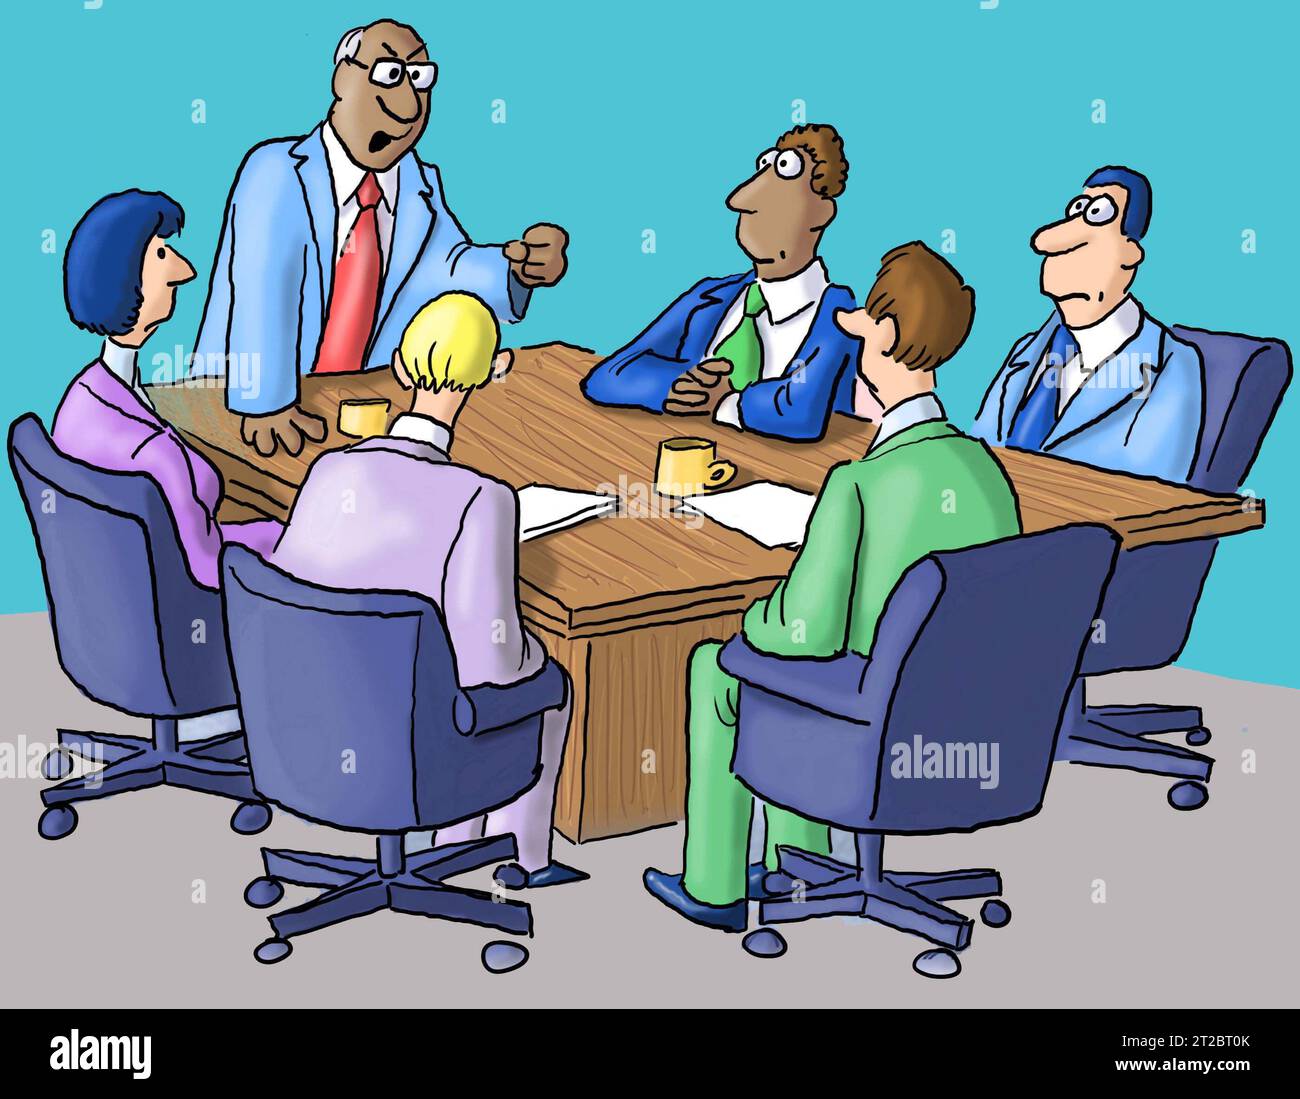 A black boss is angry at his team for not performing well. Stock Photo